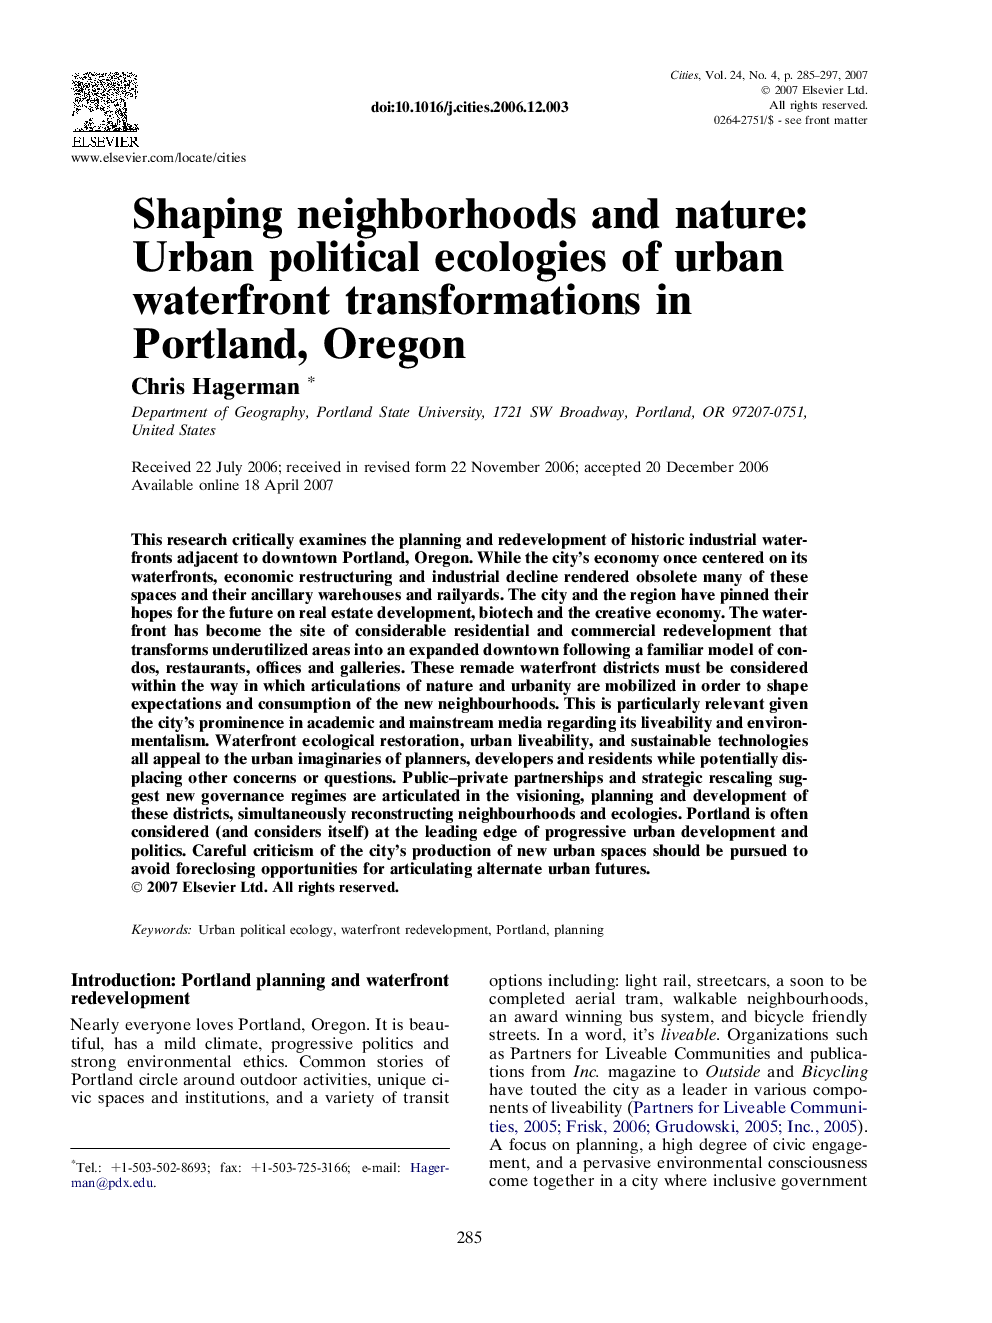 Shaping neighborhoods and nature: Urban political ecologies of urban waterfront transformations in Portland, Oregon